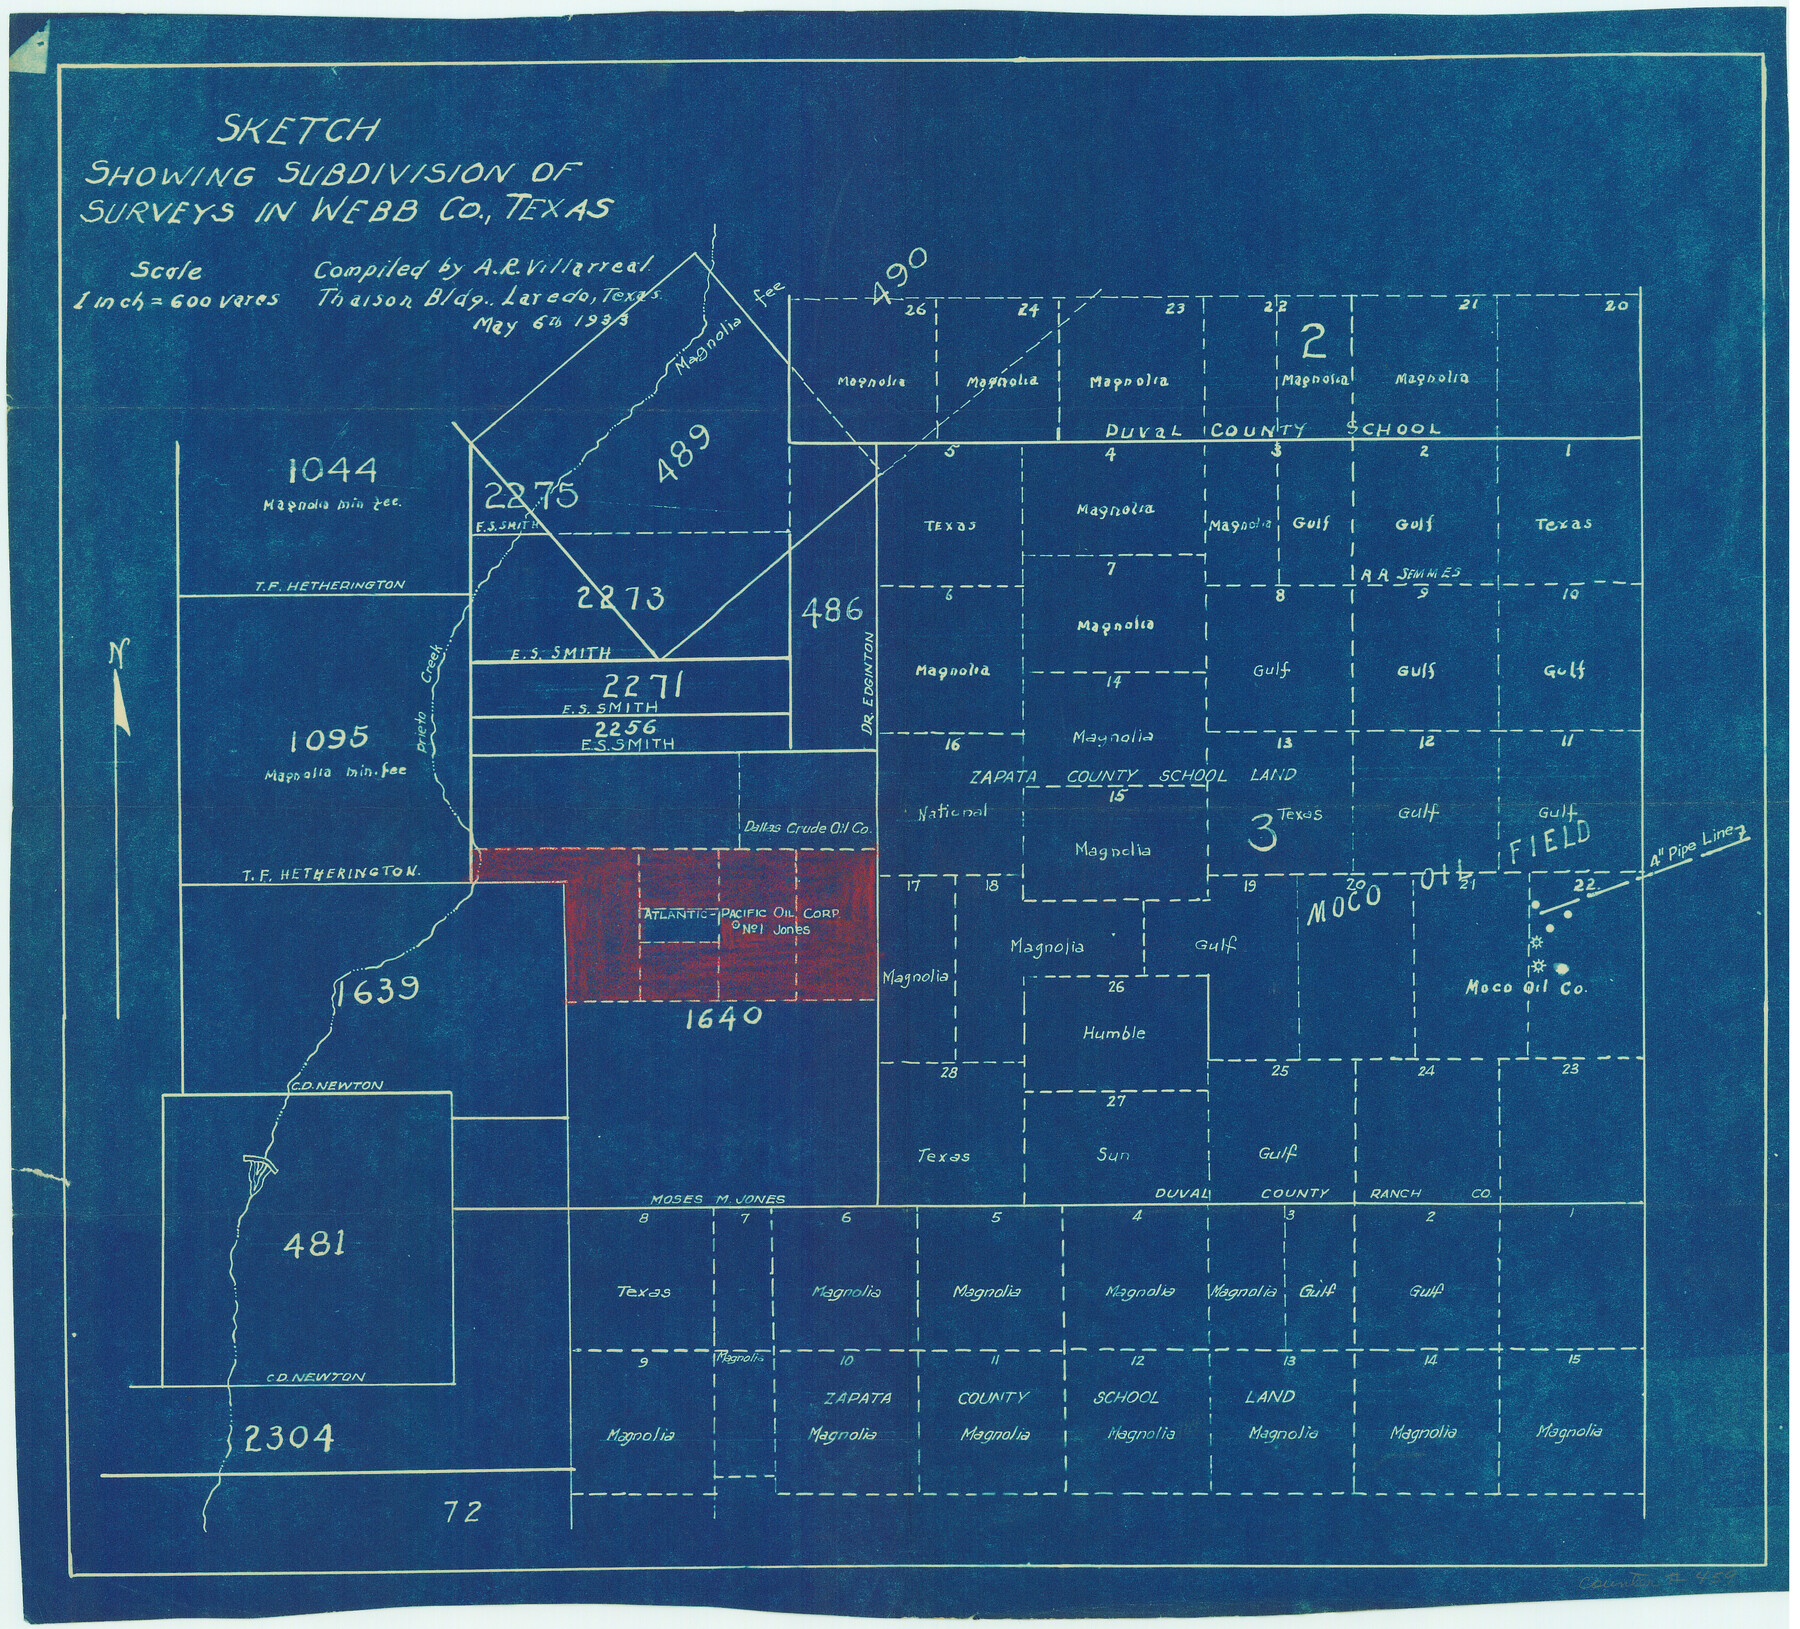 459, Sketch showing subdivision of surveys in Webb Co., Texas, Maddox Collection